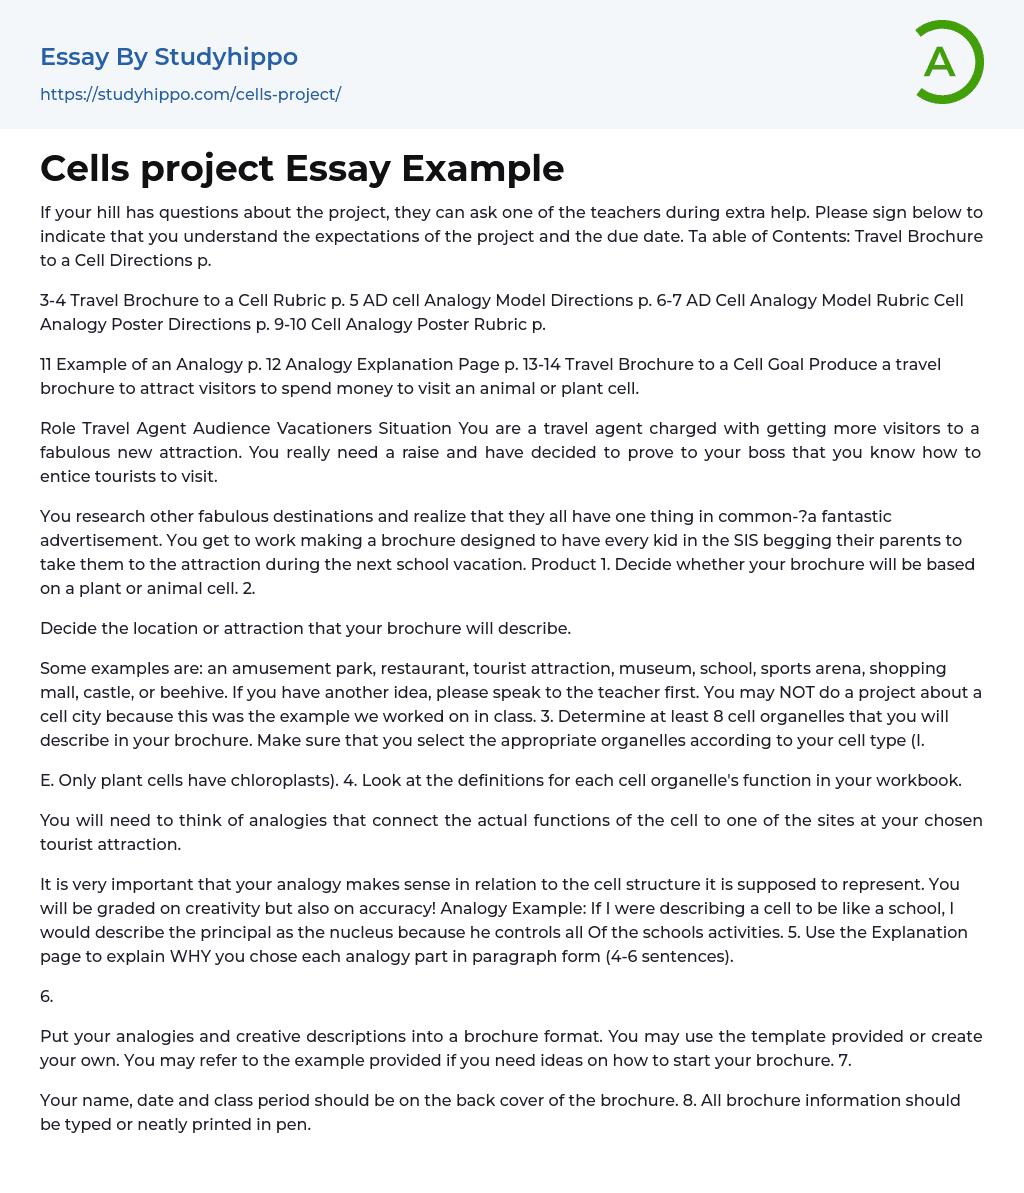 Cells project Essay Example